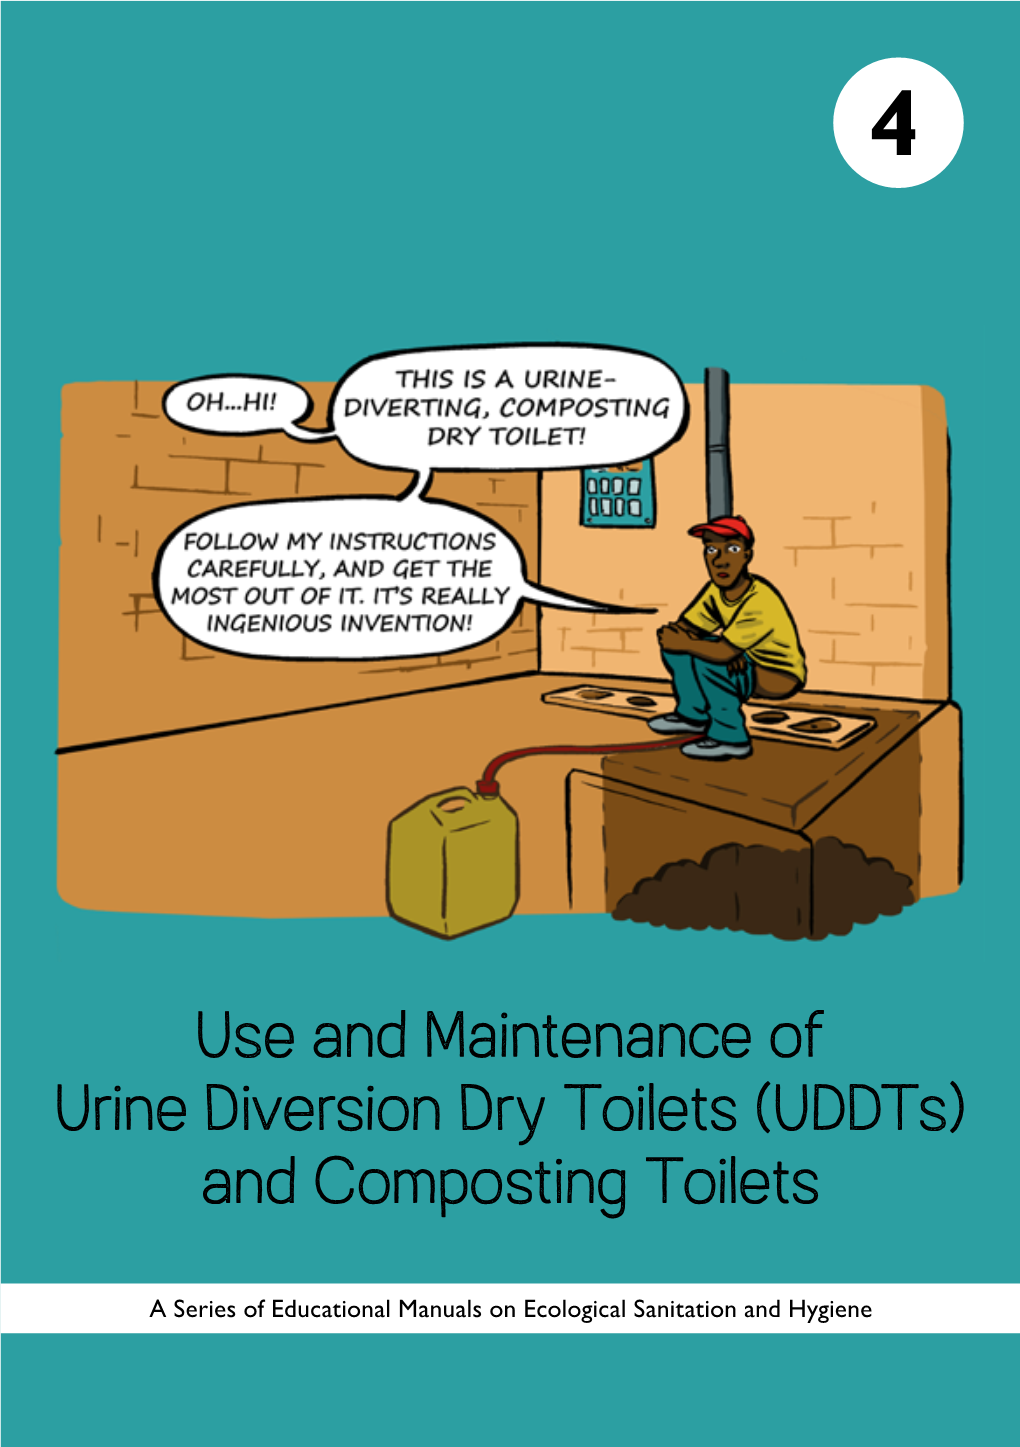 Use and Maintenance of Urine Diversion Dry Toilets (Uddts) and Composting Toilets